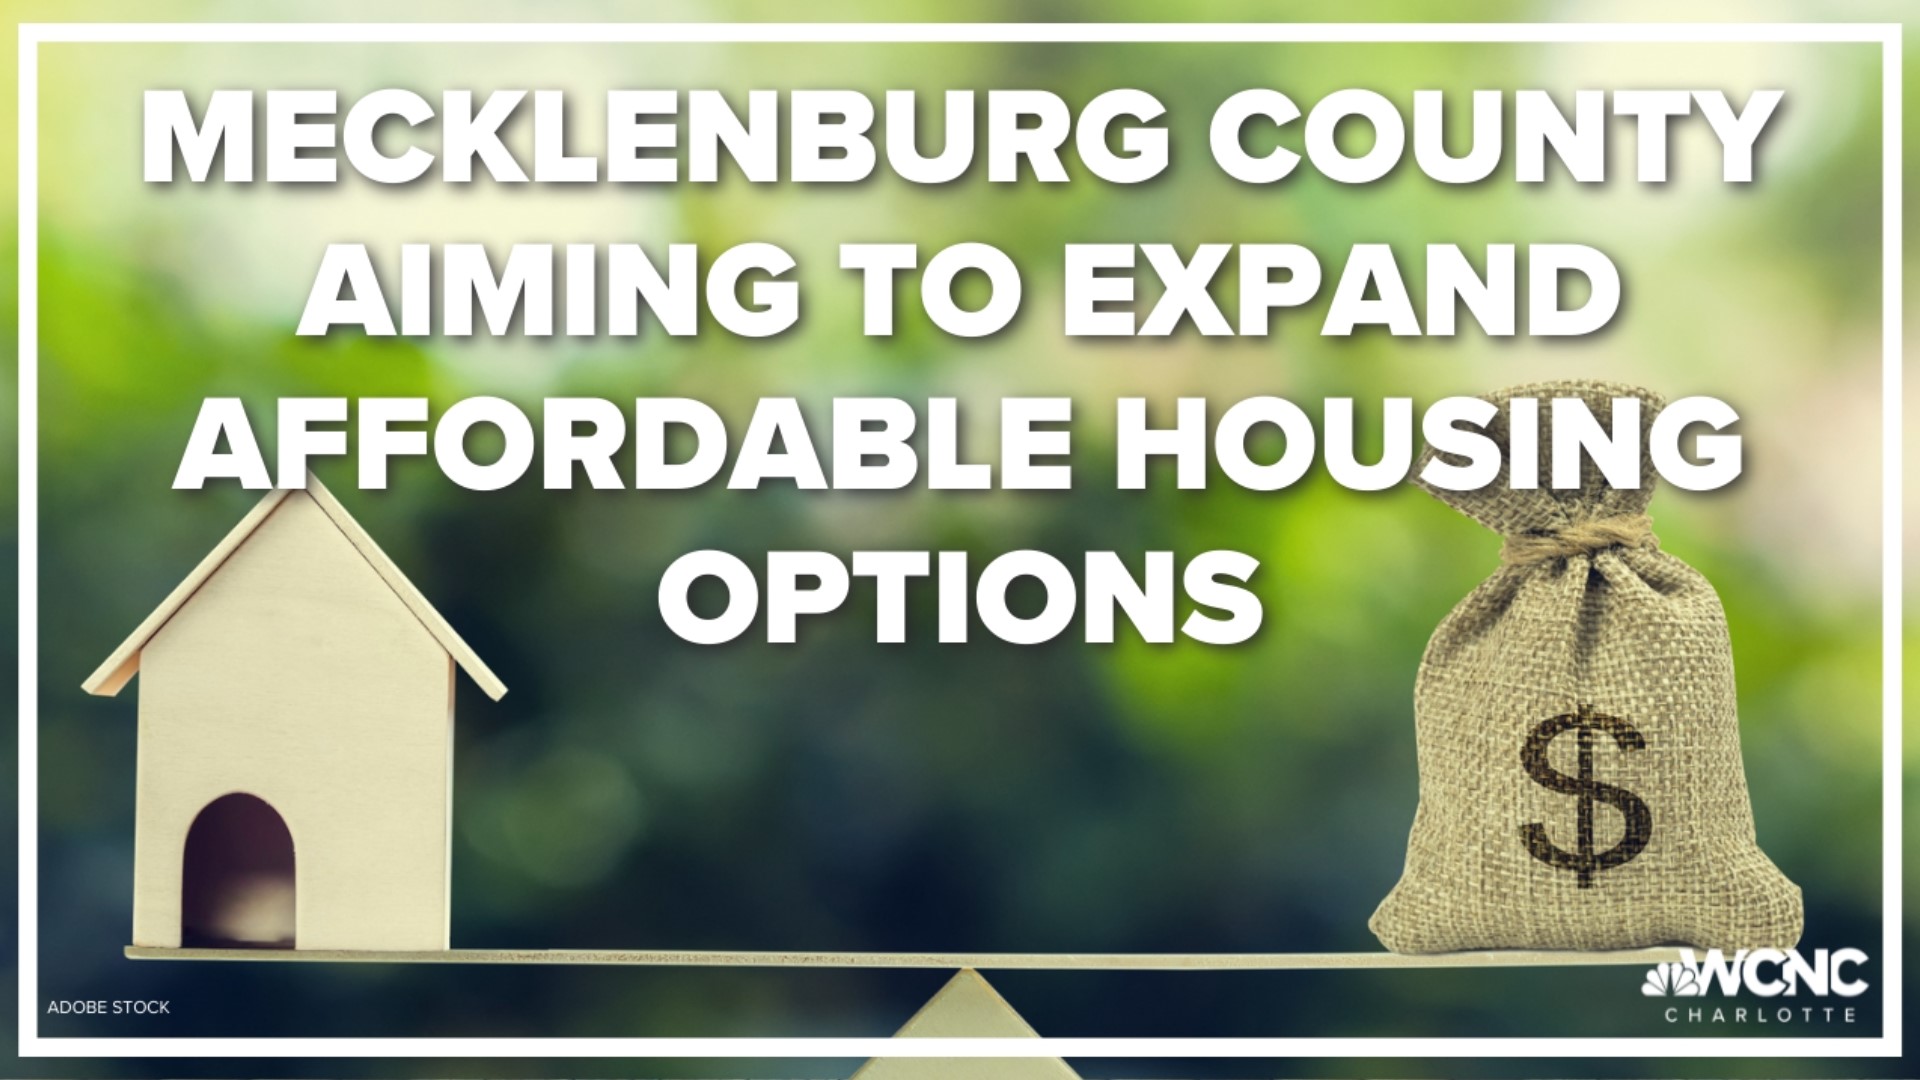 Mecklenburg County said it knows of about 3,000 people without homes countywide, and it wants to expand access to housing resources.